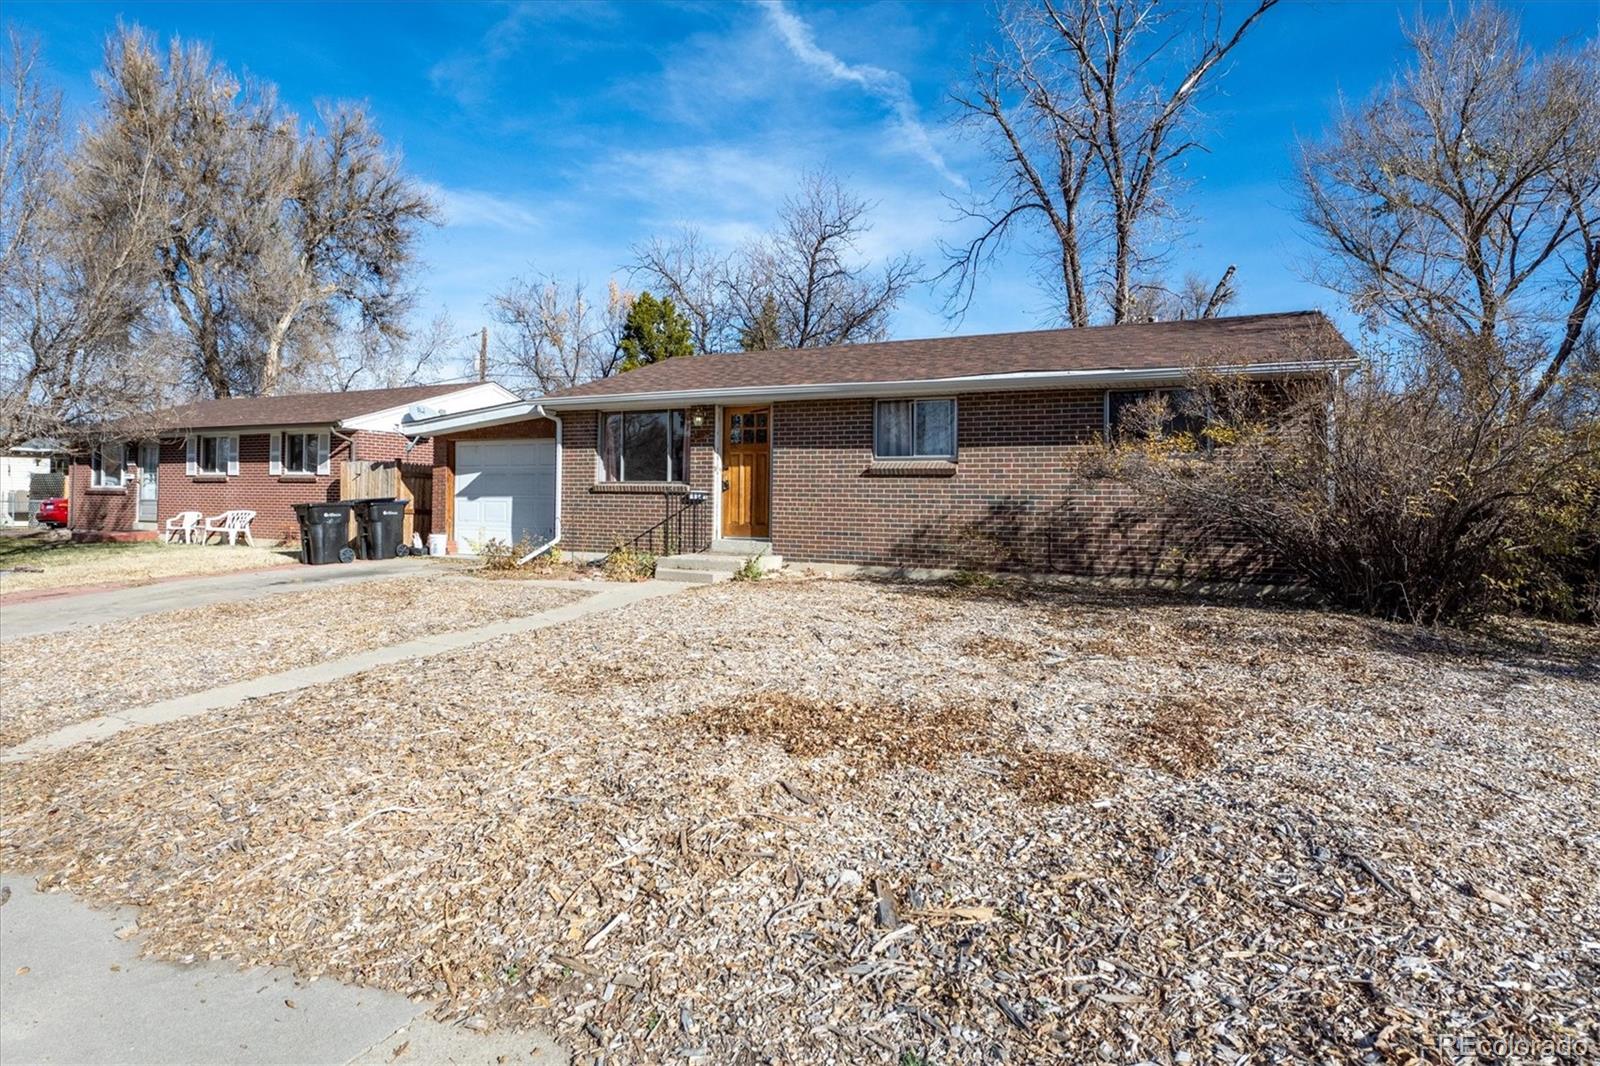 5210  quay street, arvada sold home. Closed on 2023-12-27 for $375,000.